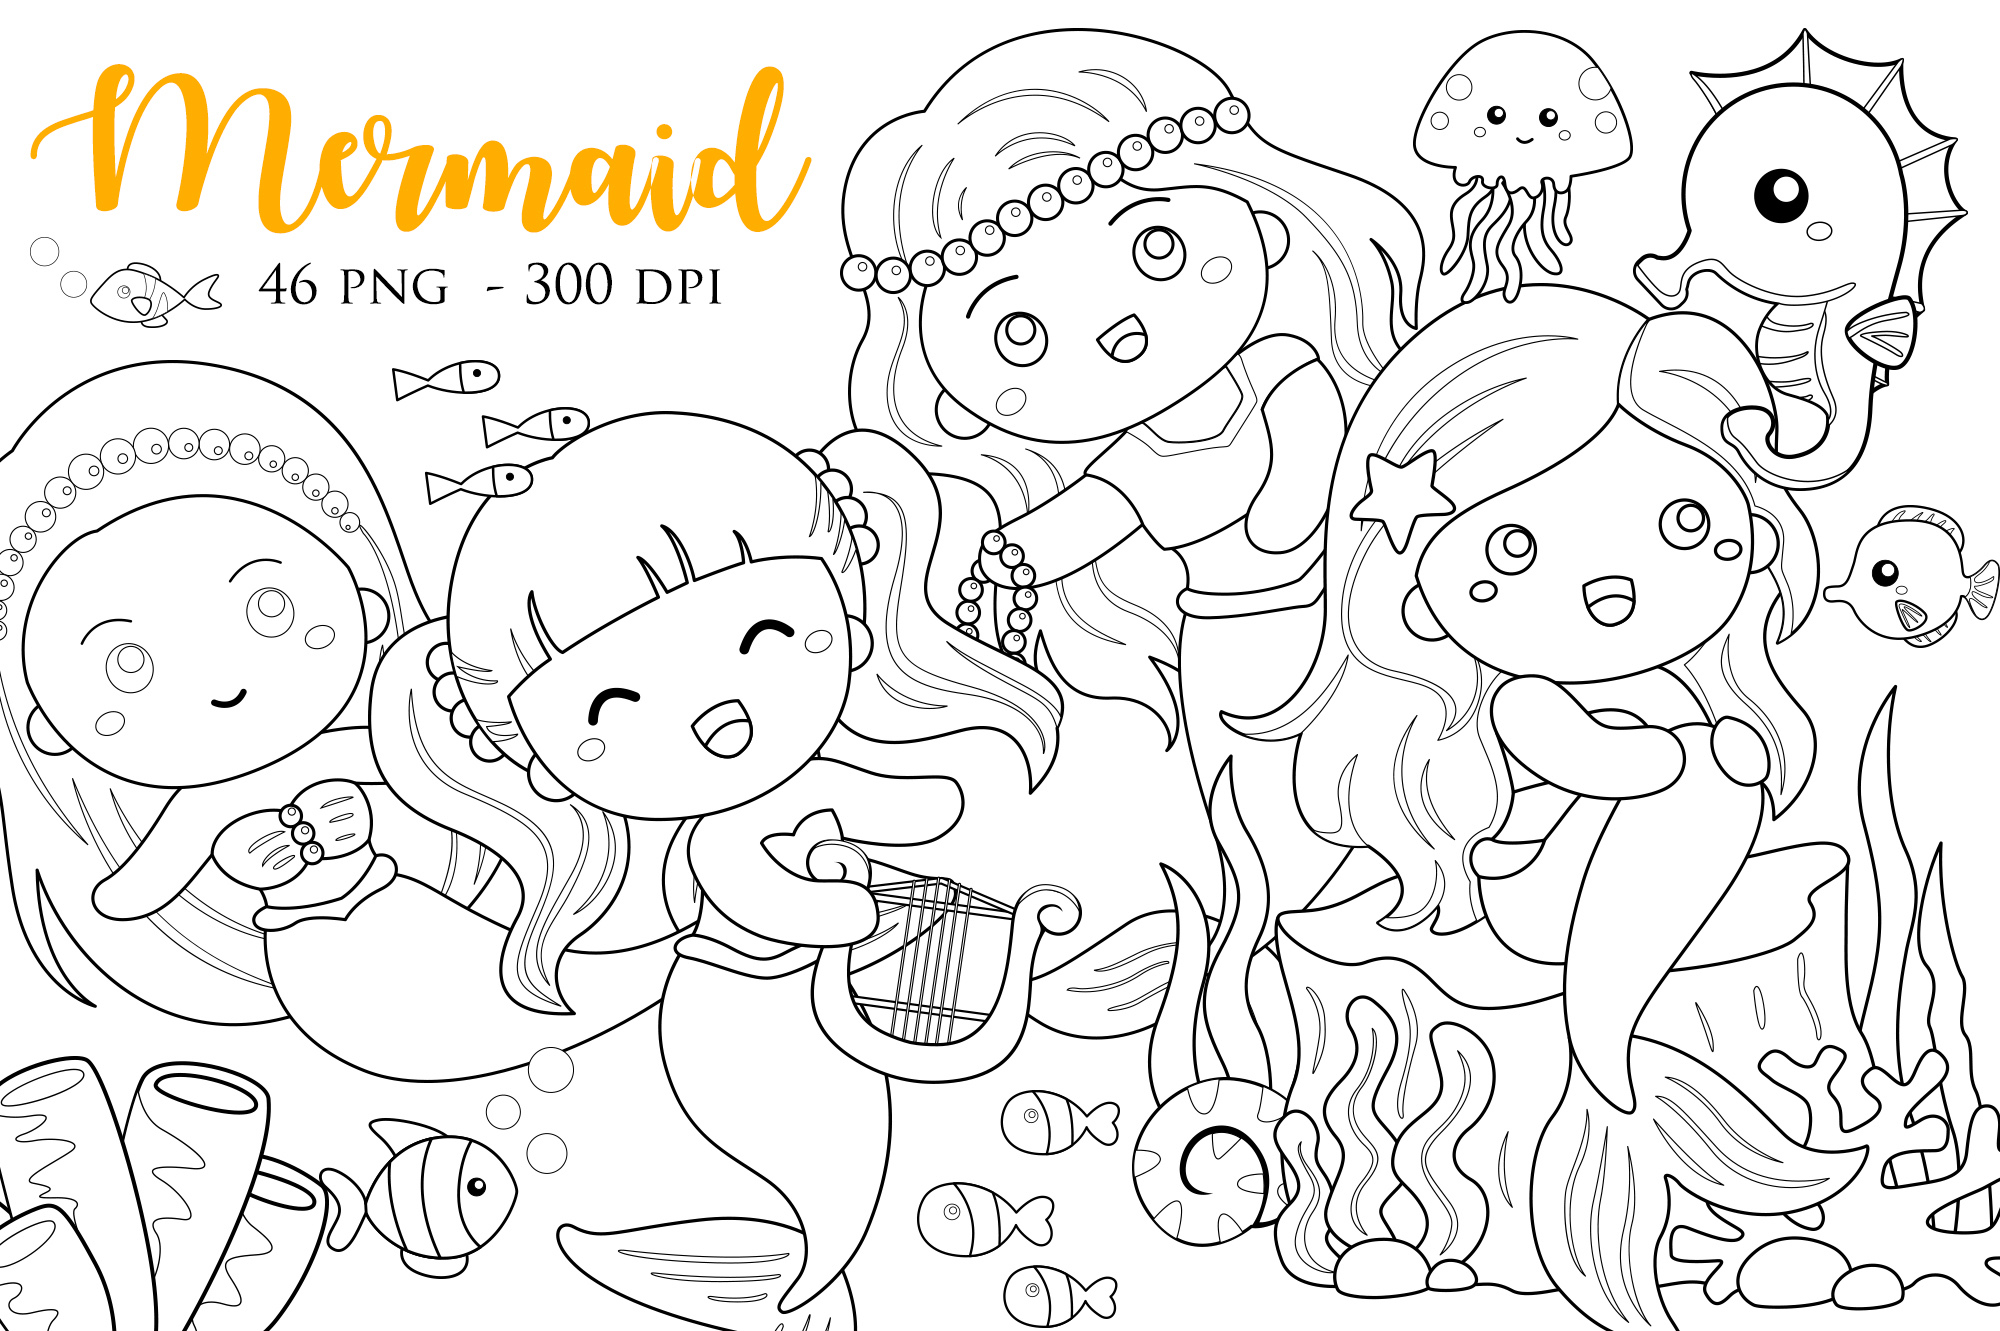 Mermaid coloring page for kids.